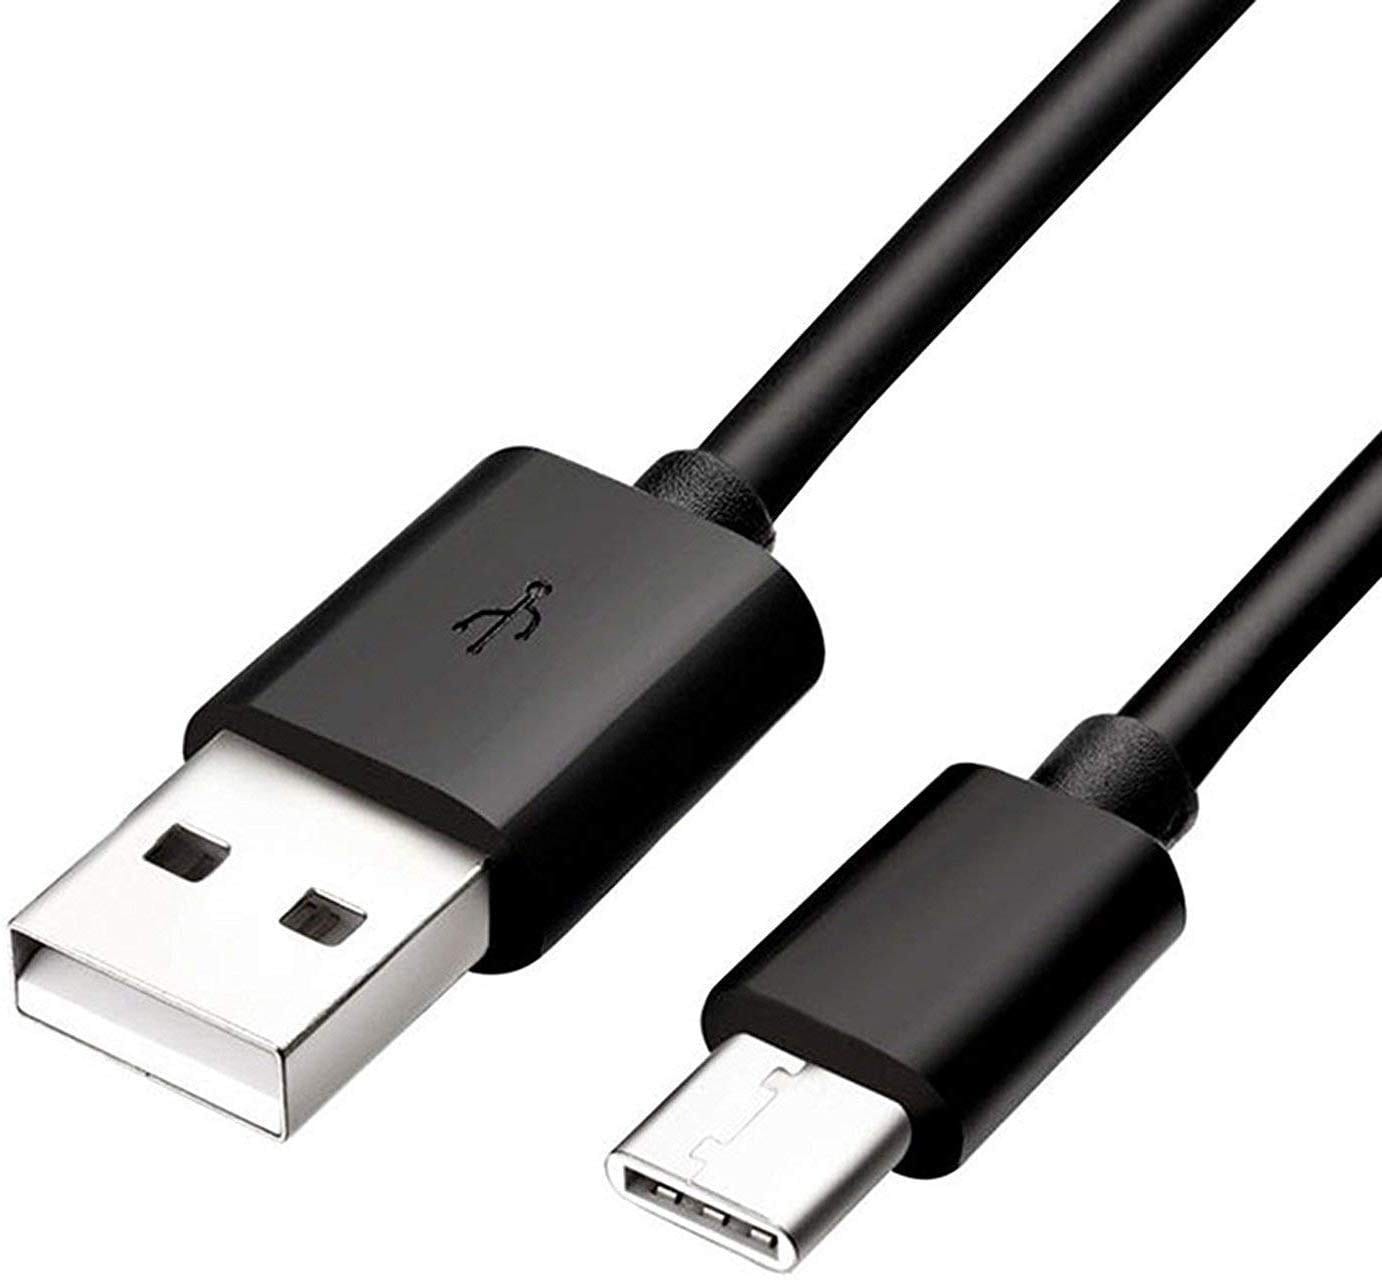 Samsung Galaxy A70 USB Cable to Type C Charging Cable Lead Black - 1M - SmartPhoneGadgetUK